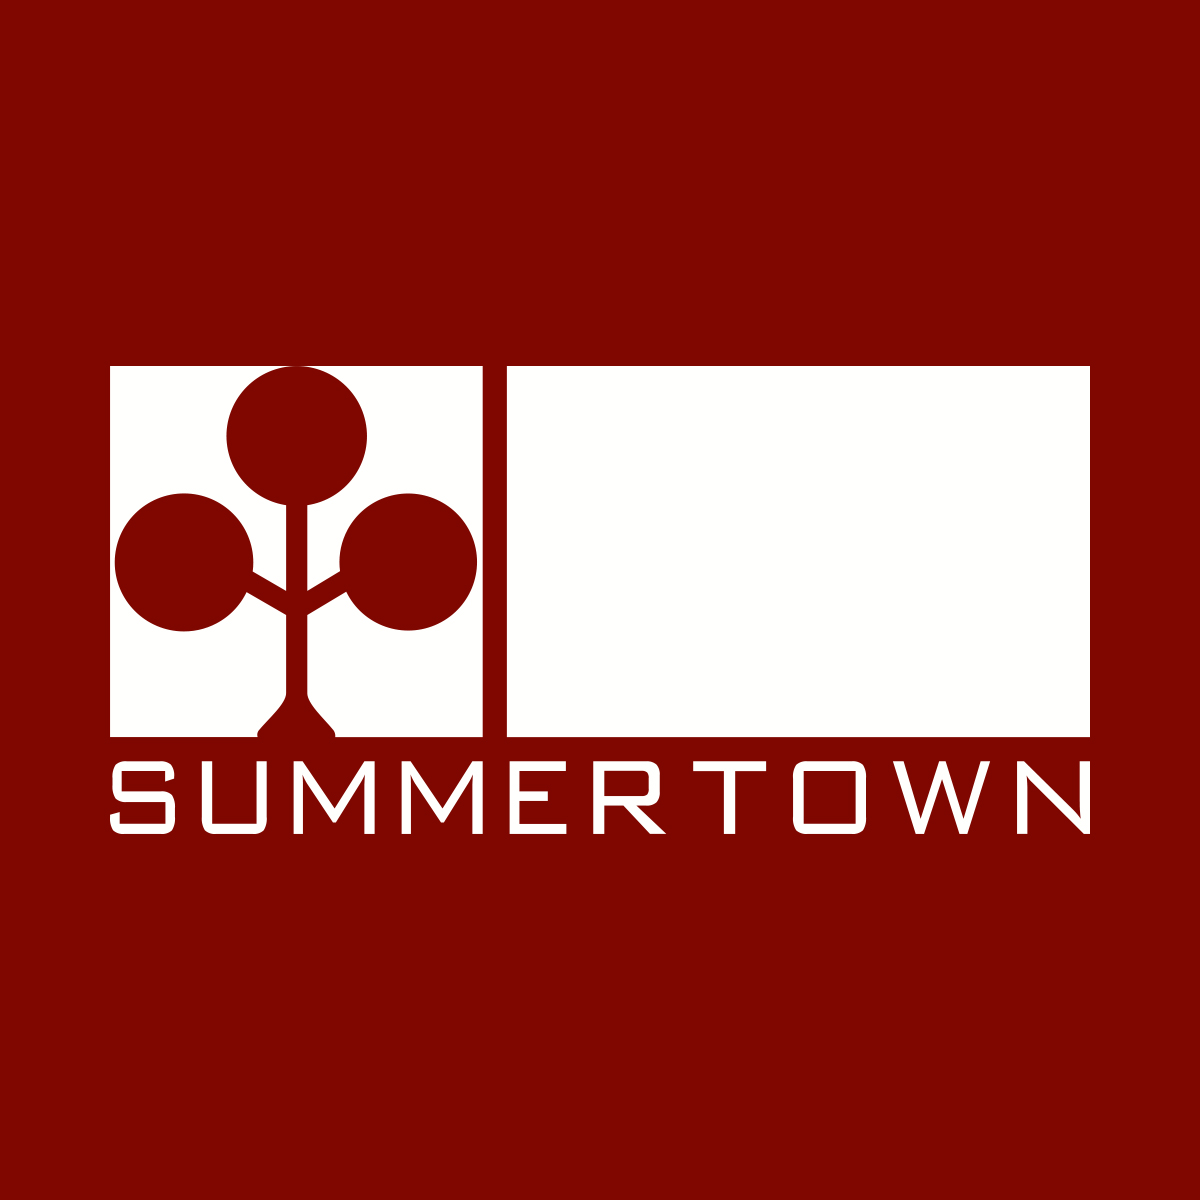 Summertown: Your Top Choice Among Office Fit Out Companies in Dubai